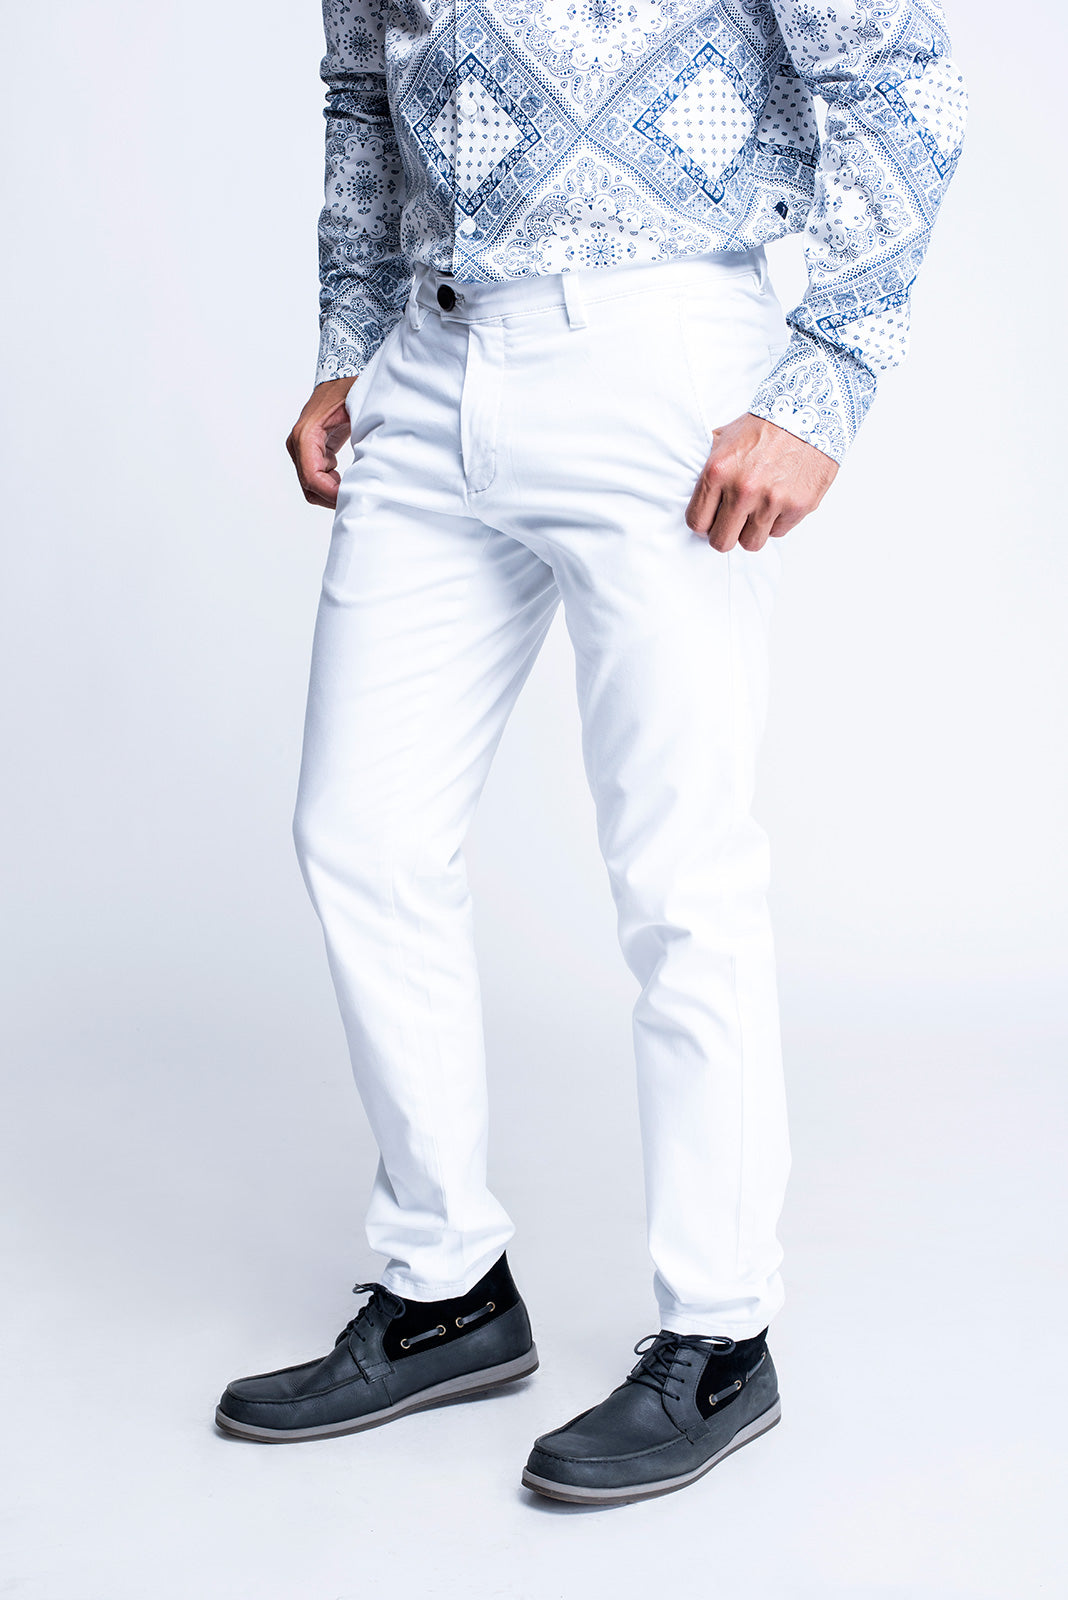 Andrew Smith Celana Panjang Chinos Slim Fit Pria A0026X08D